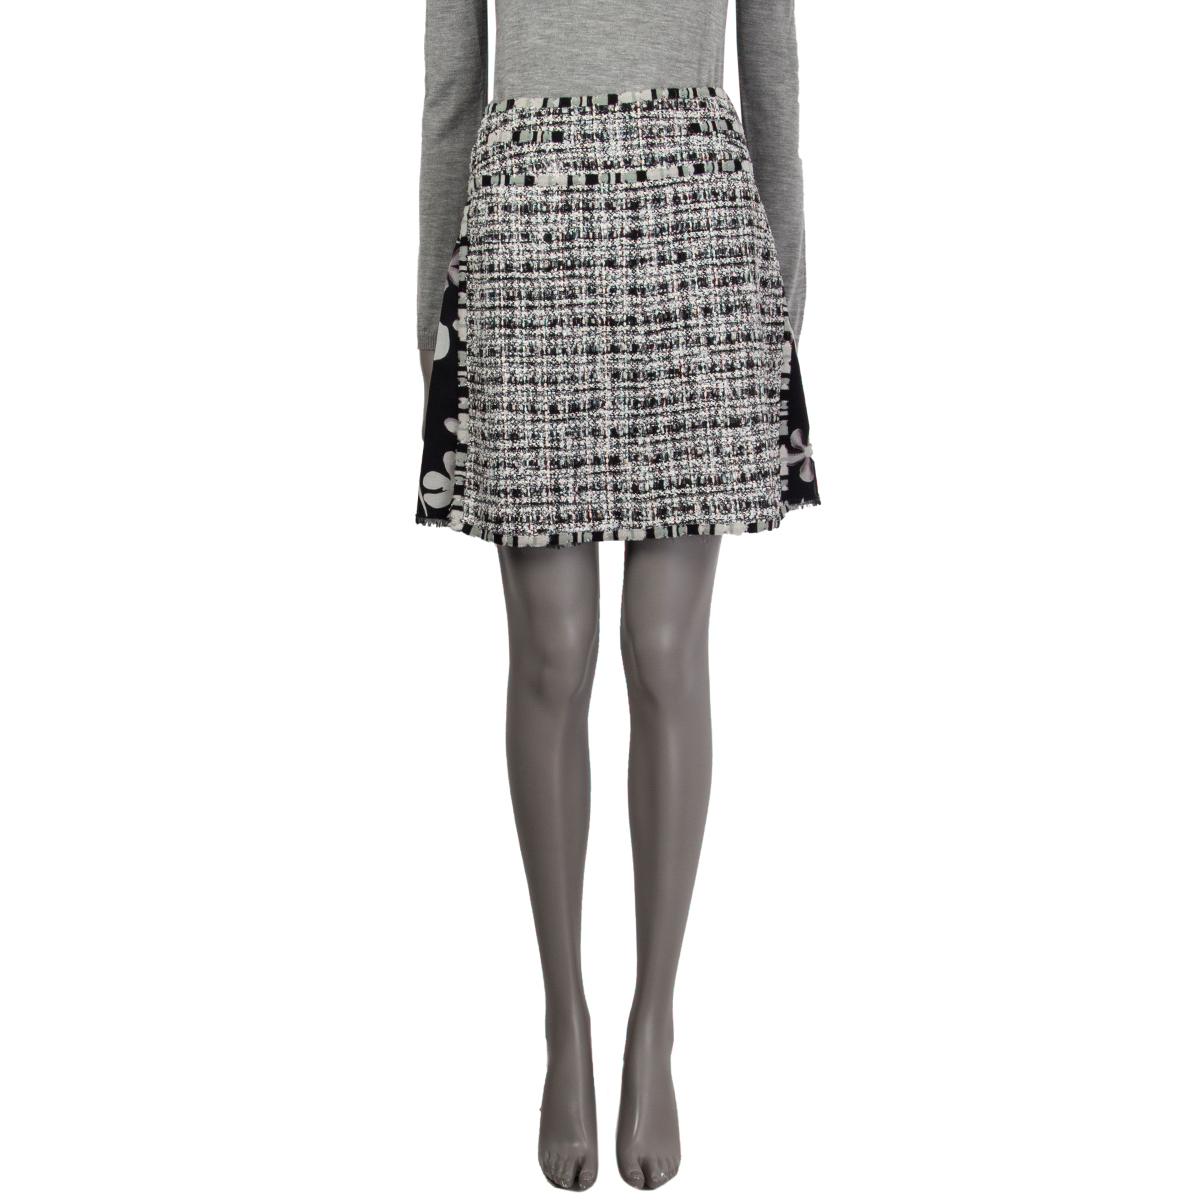 100% authentic Chanel plaid-tweed and floral A-line layered skirt in black and off-white rayon (40%), cotton (20%), silk (20%), nylon (10%), and wool (10%). With striped cotton trims, high slits on the sides, and fray hemline. Closes with hook and